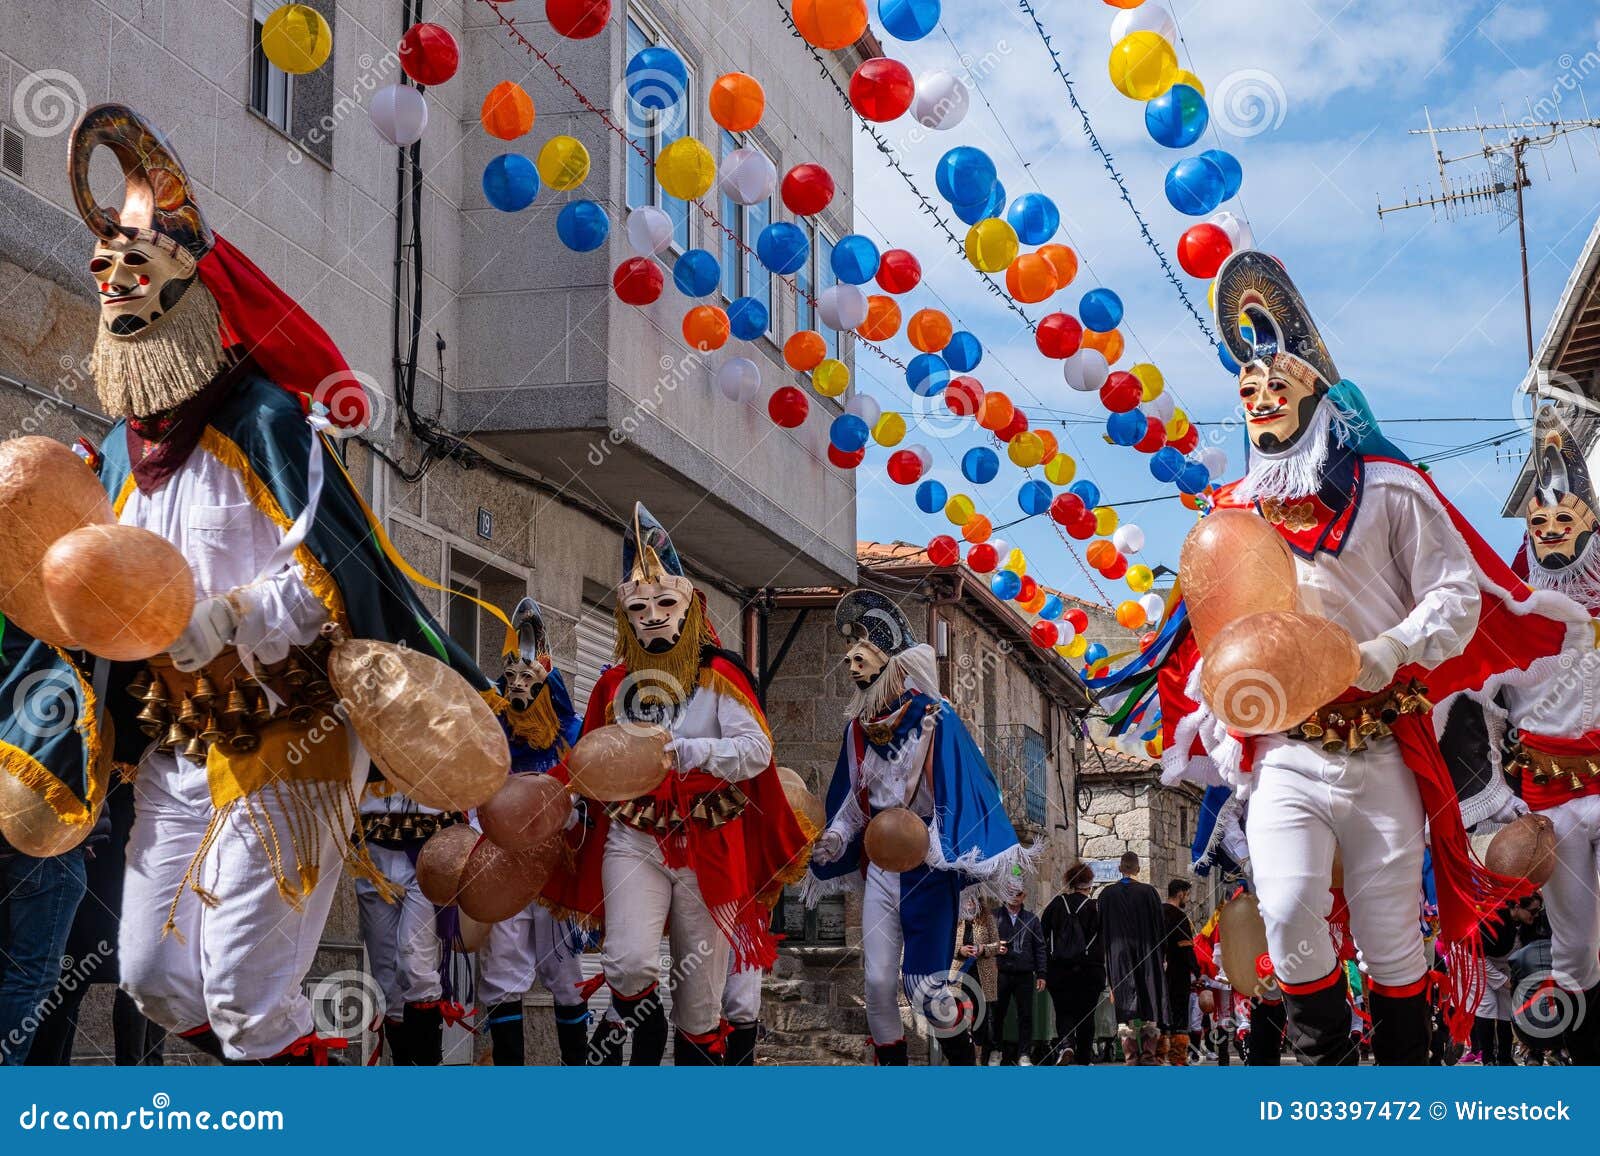 pantalla is the traditional carnival mask from xinzo de limia, ourense. galicia, spain.